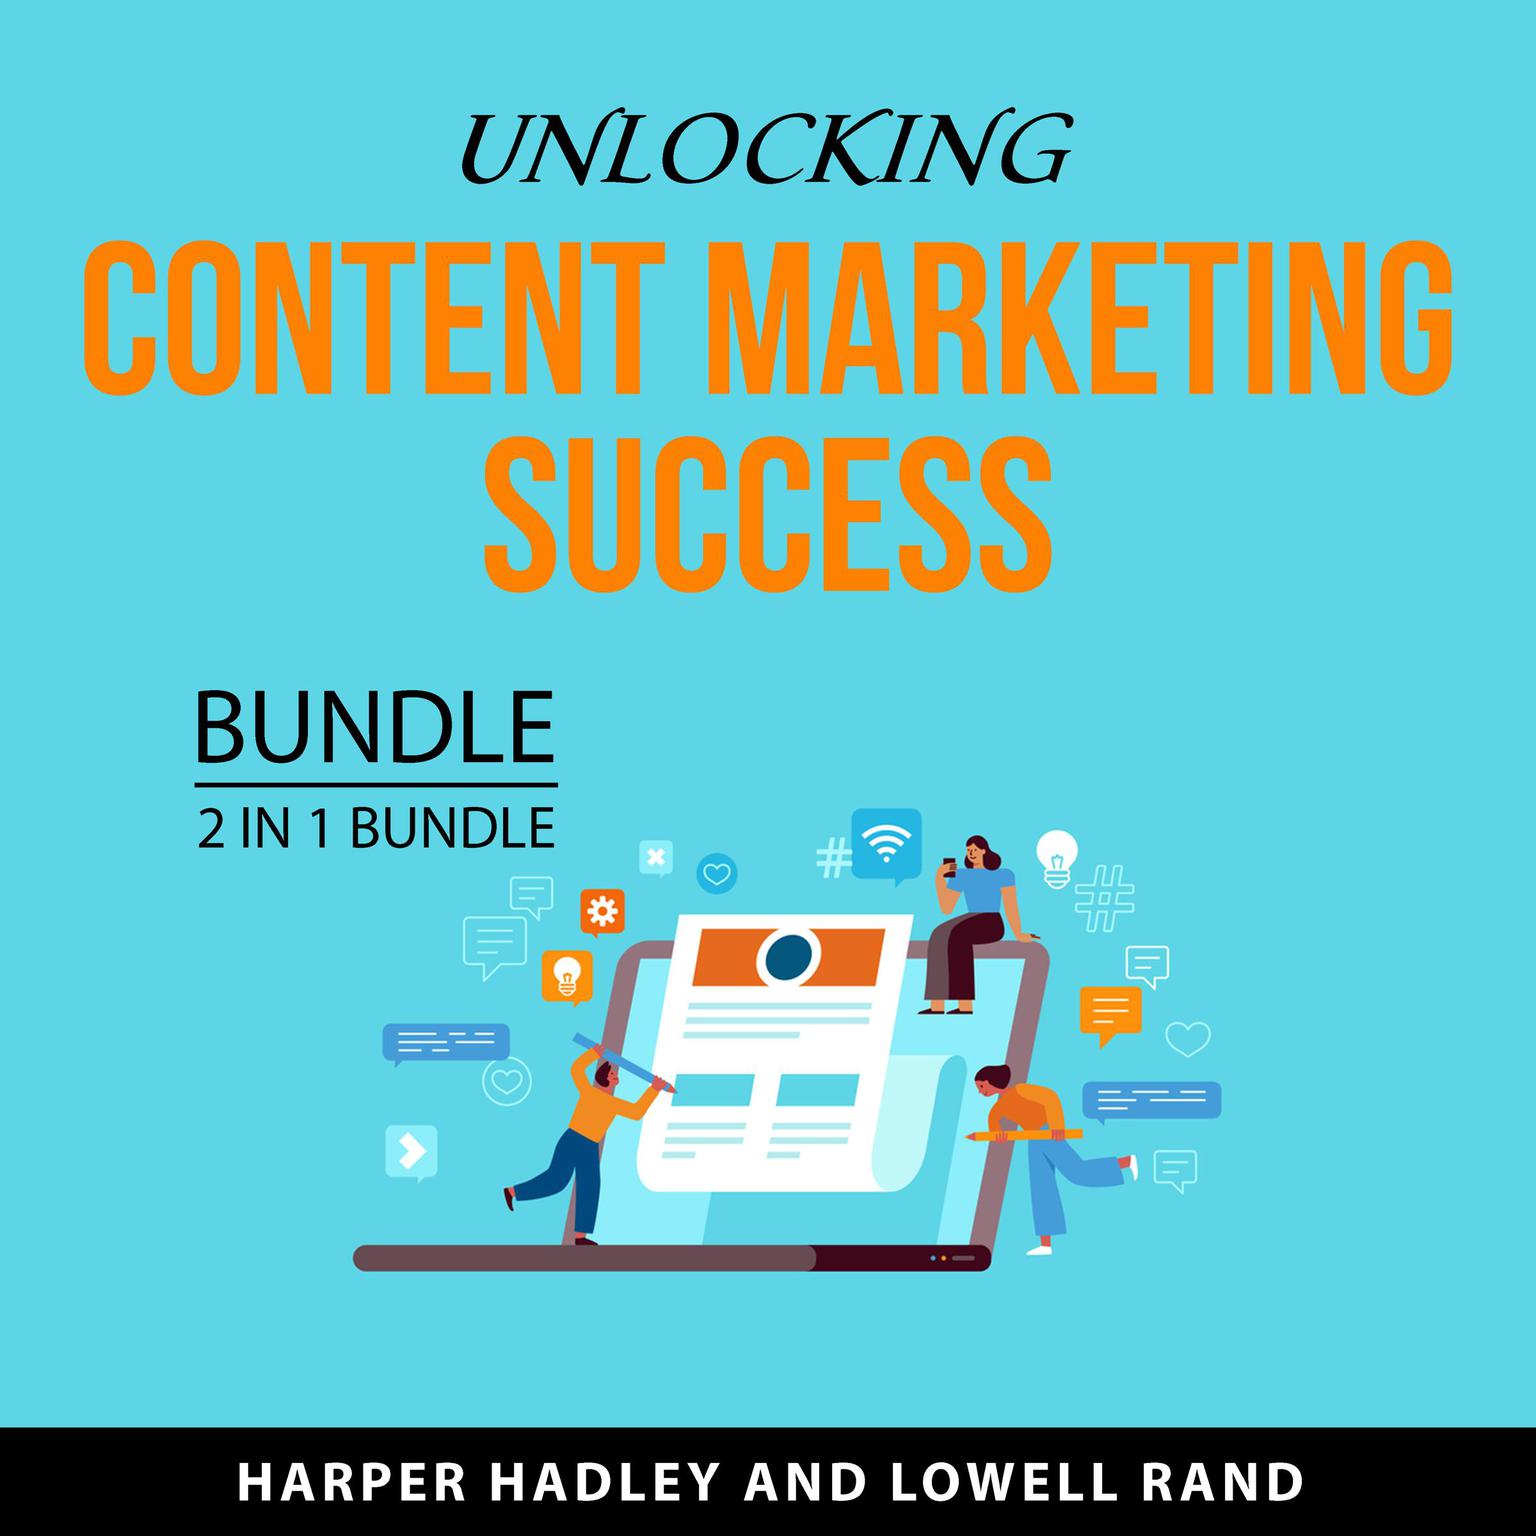 Unlocking Content Marketing Success Bundle, 2 in 1 Bundle: Master Content Marketing and Content Marketing That Converts Audiobook, by Harper Hadley